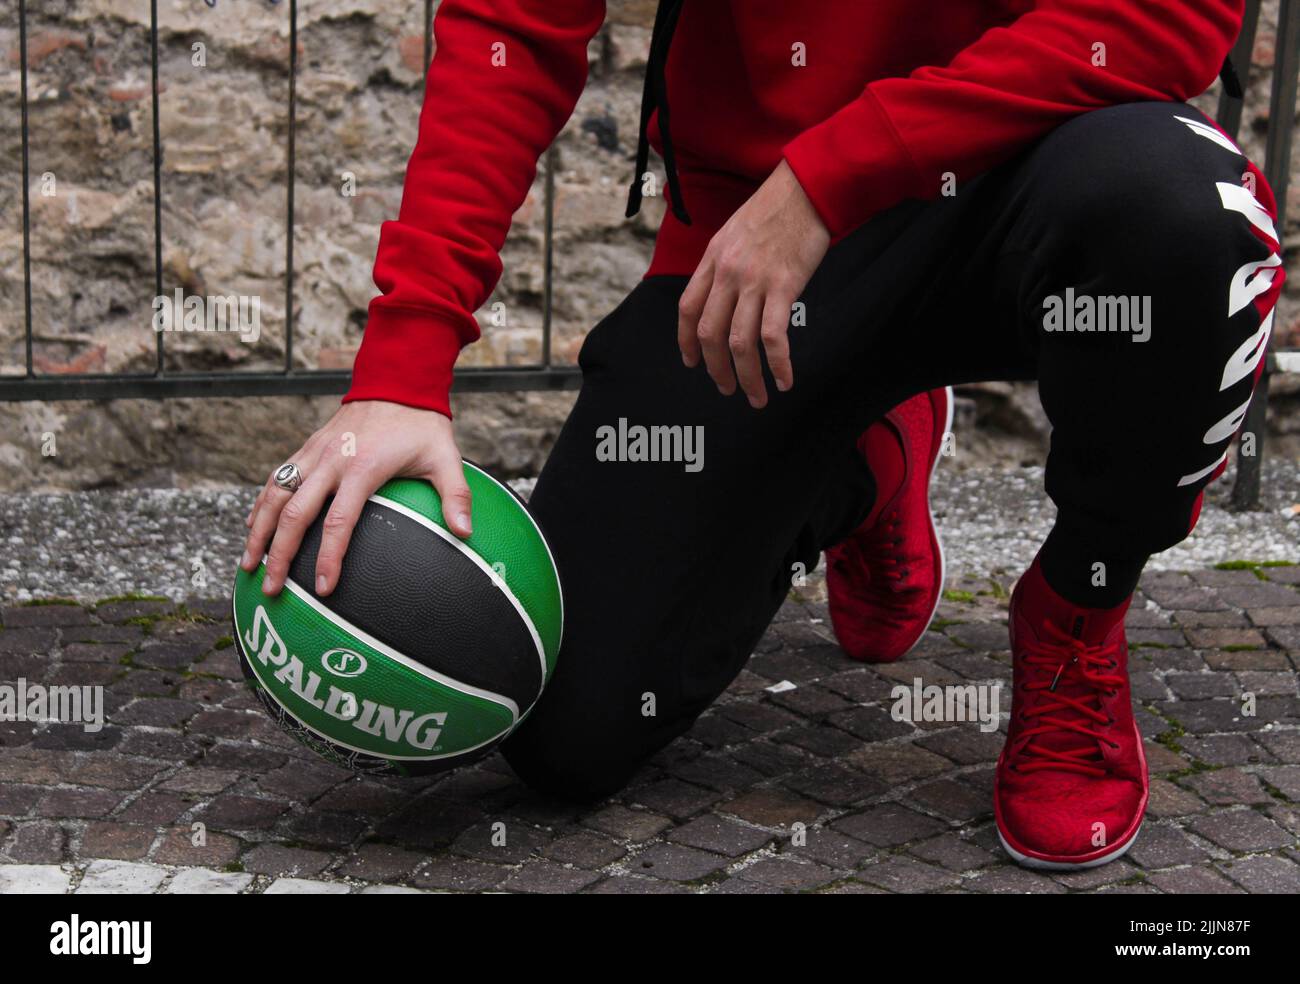 A male model wearing fashionable Air Jordan shoes and sweatpants for a photoshoot Stock Photo